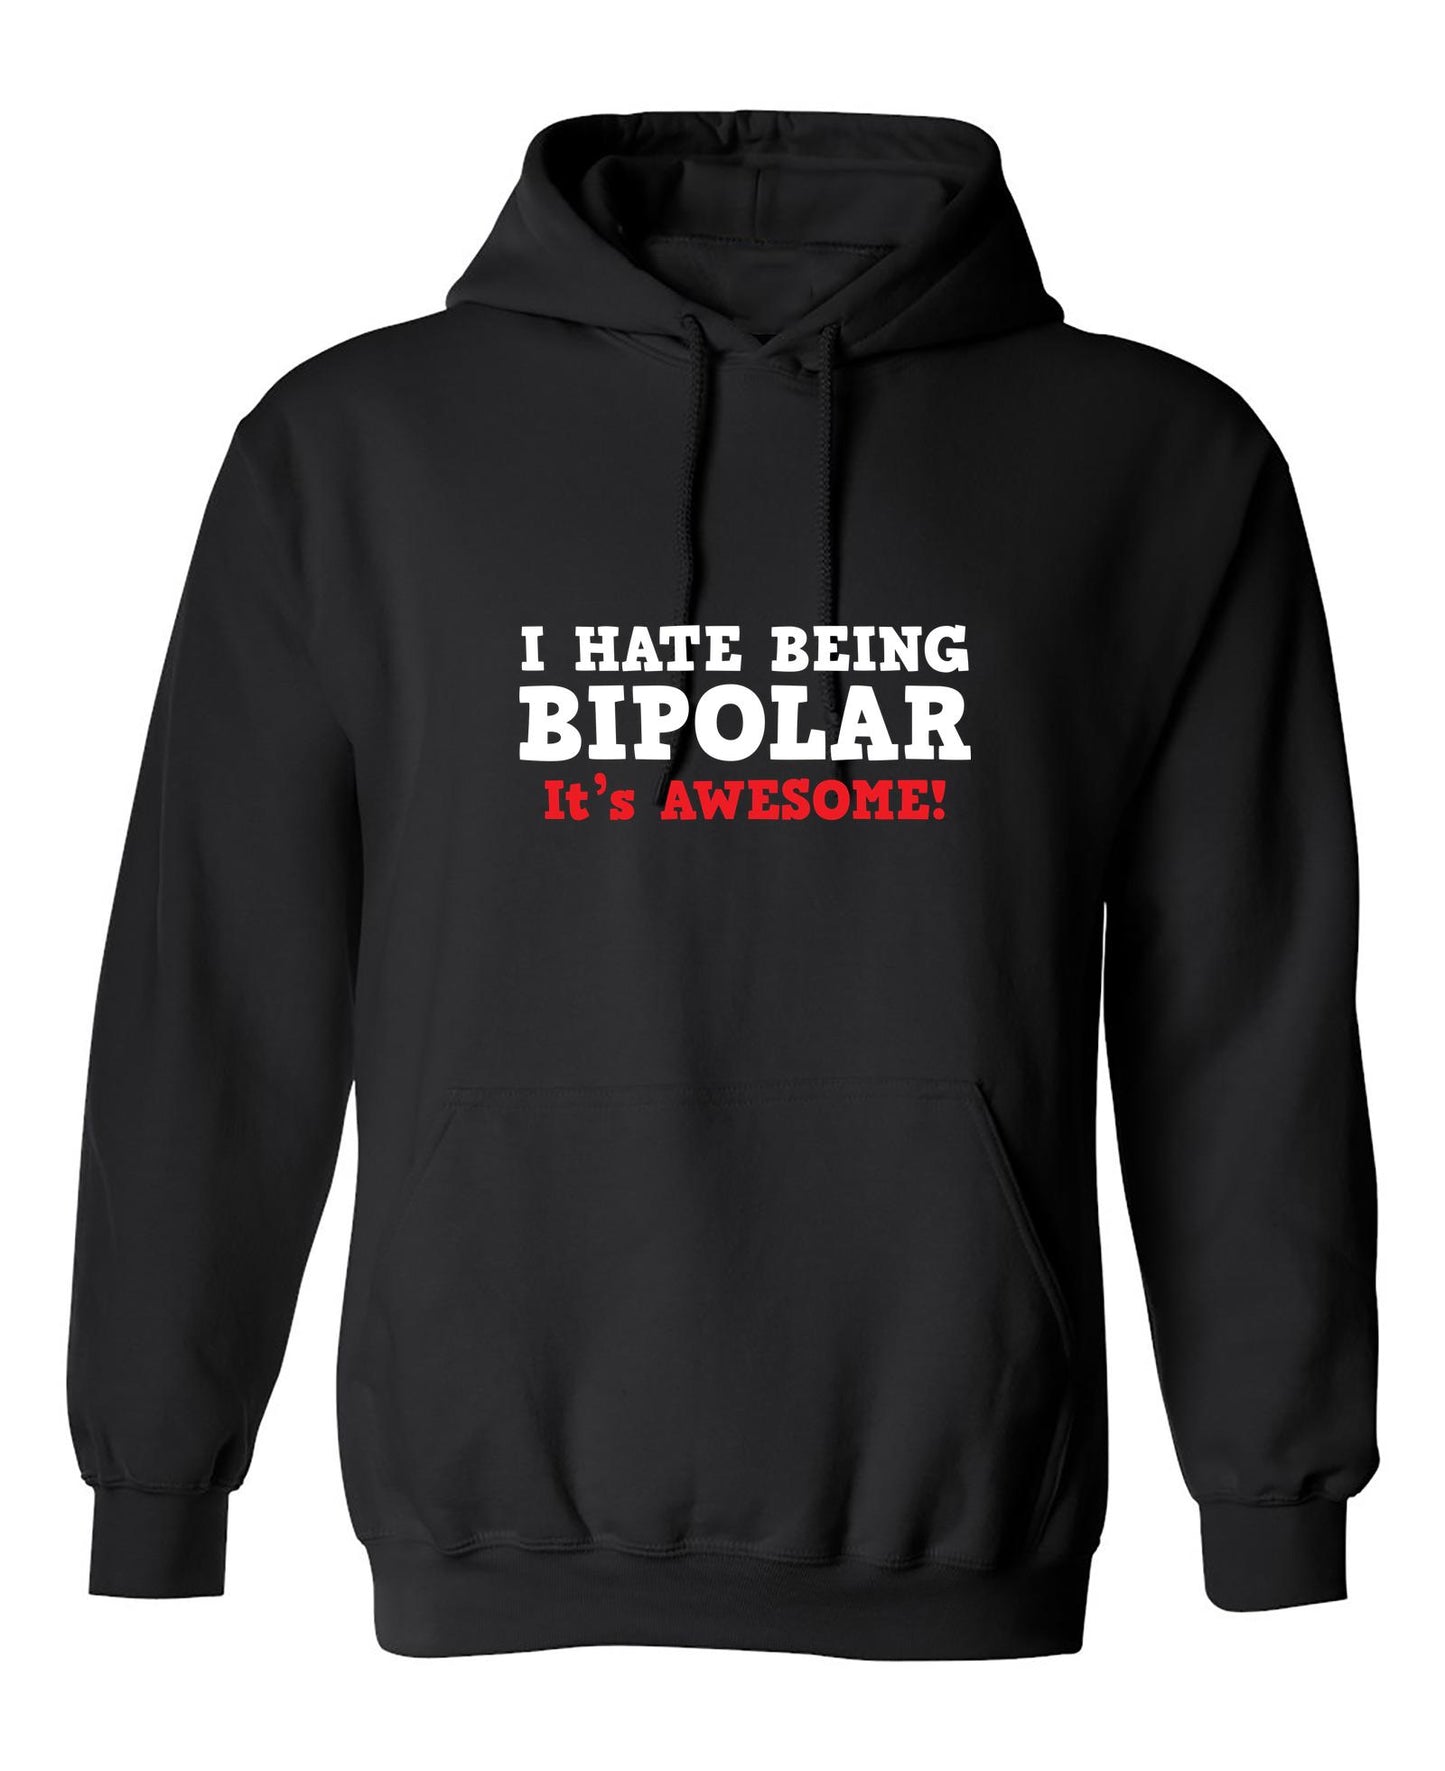 Funny T-Shirts design "I Hate Being Bipolar It's Awesome"